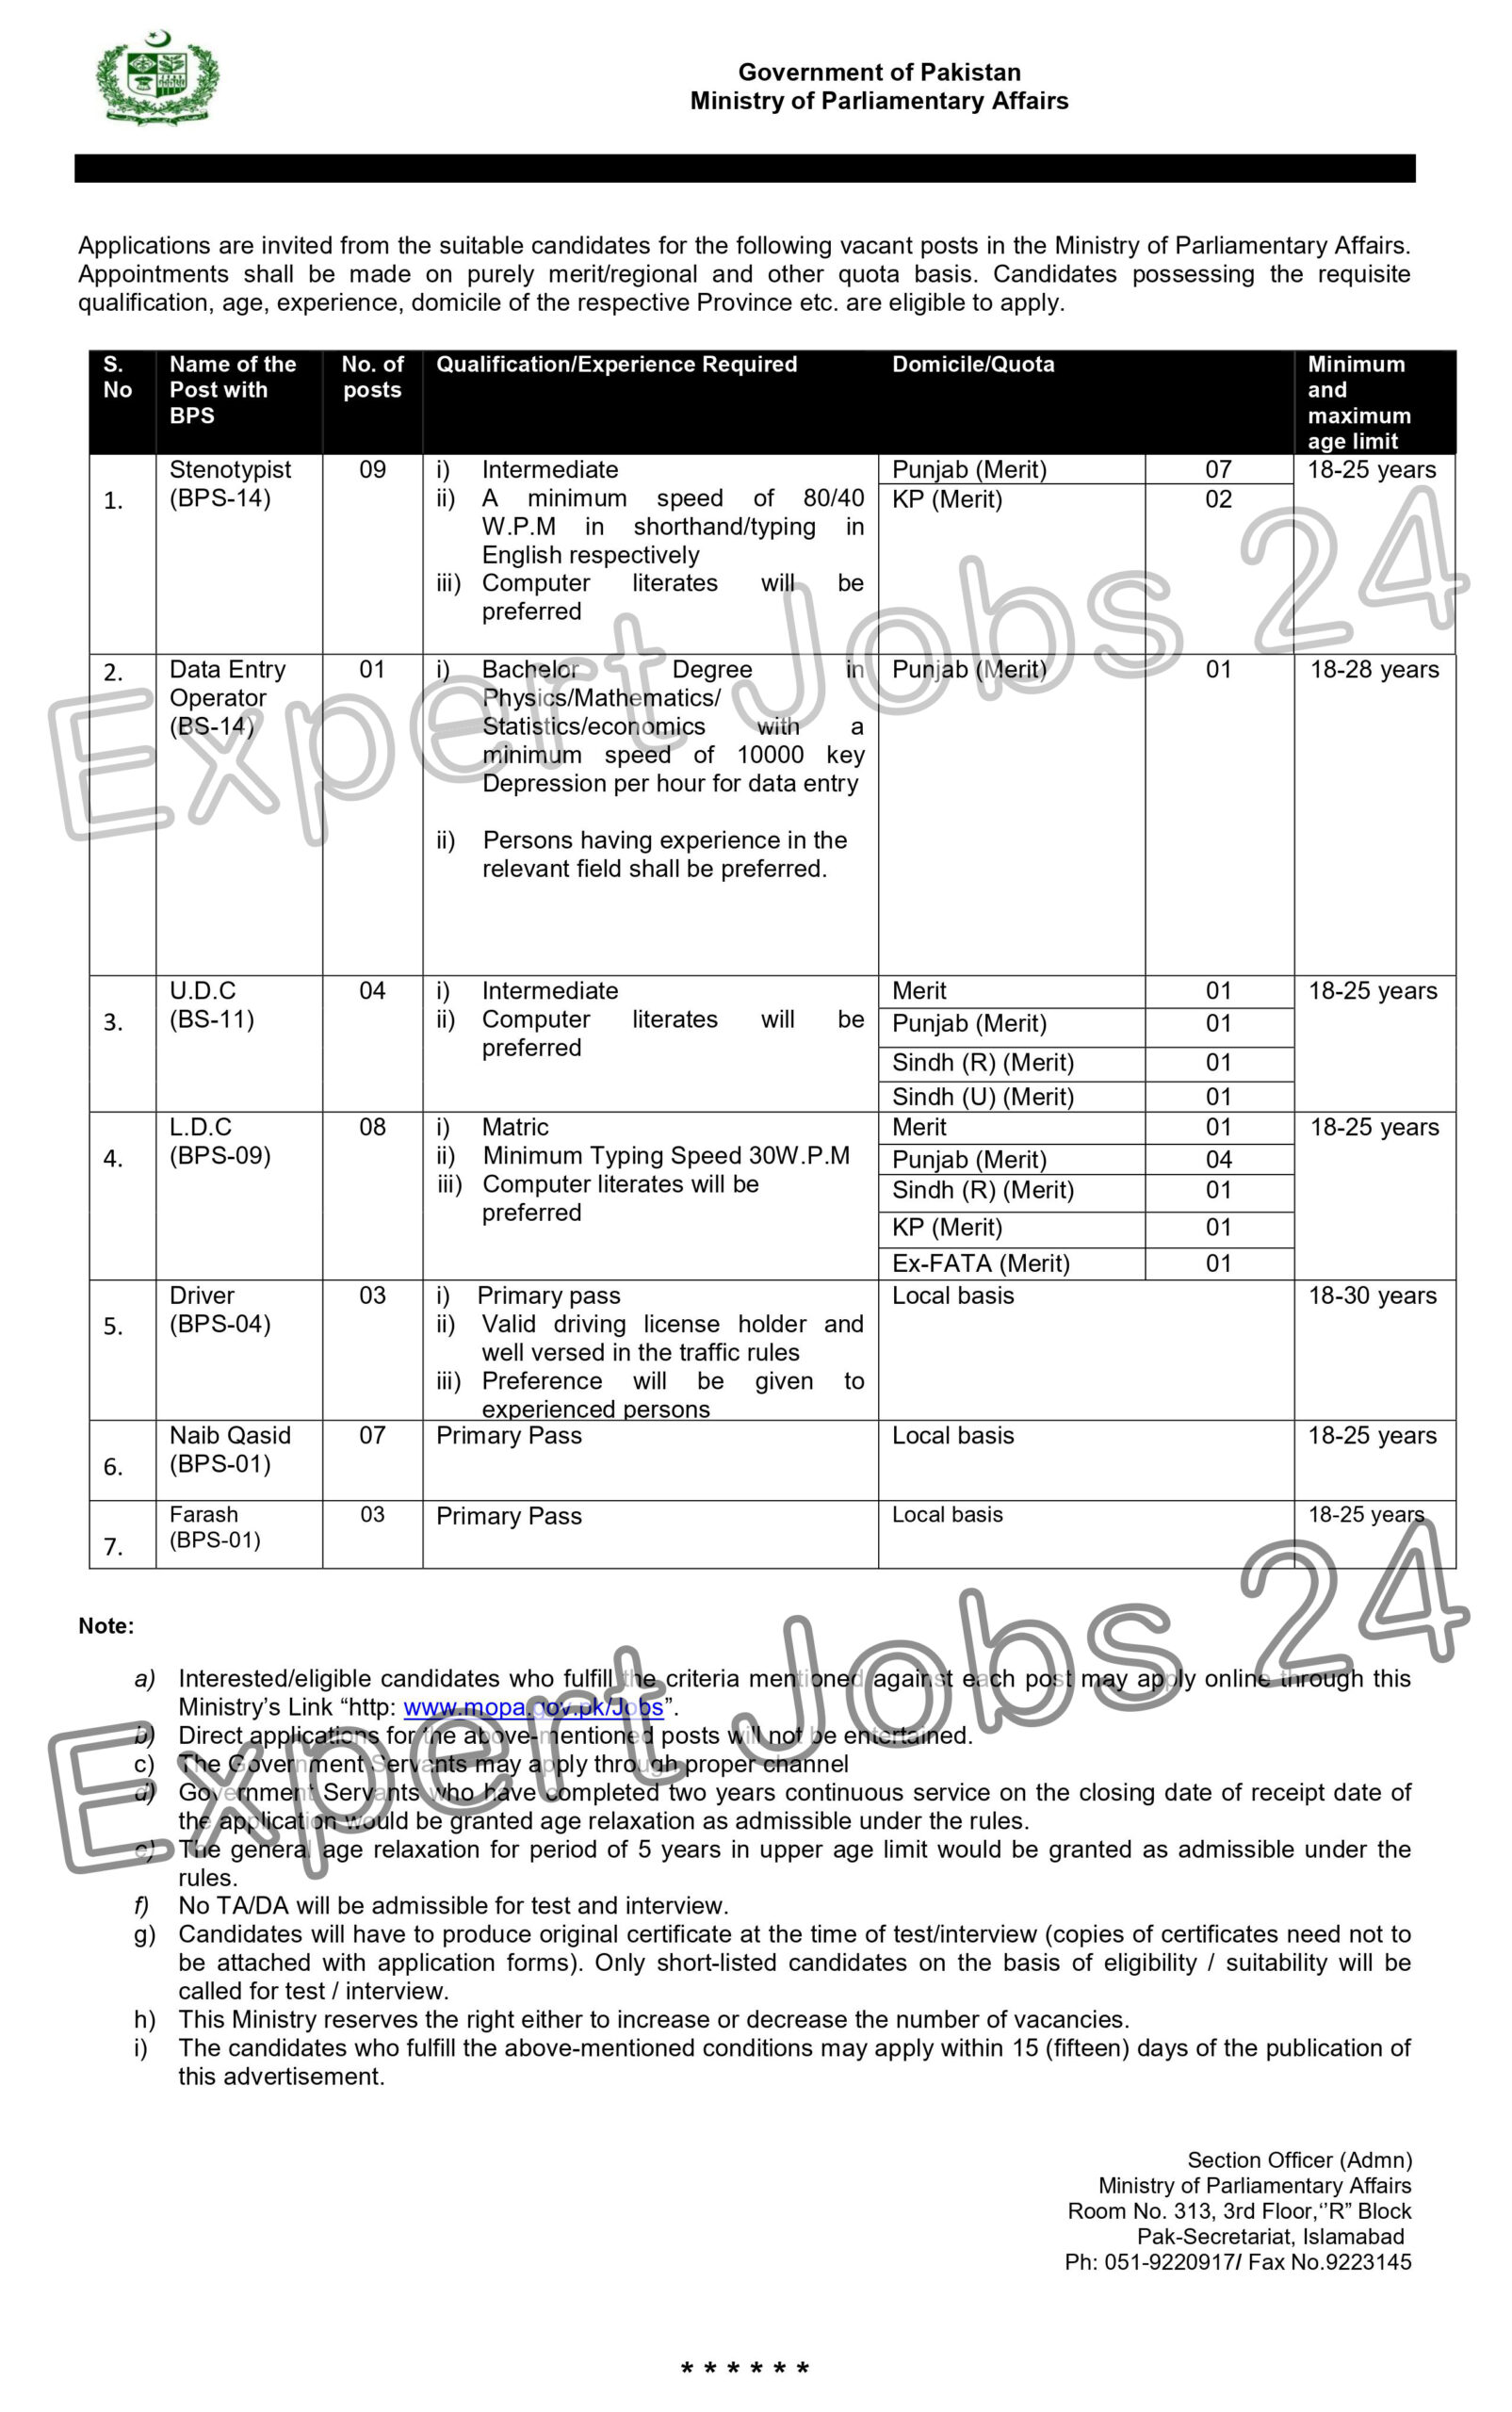 Ministry of parliamentary Affairs Jobs